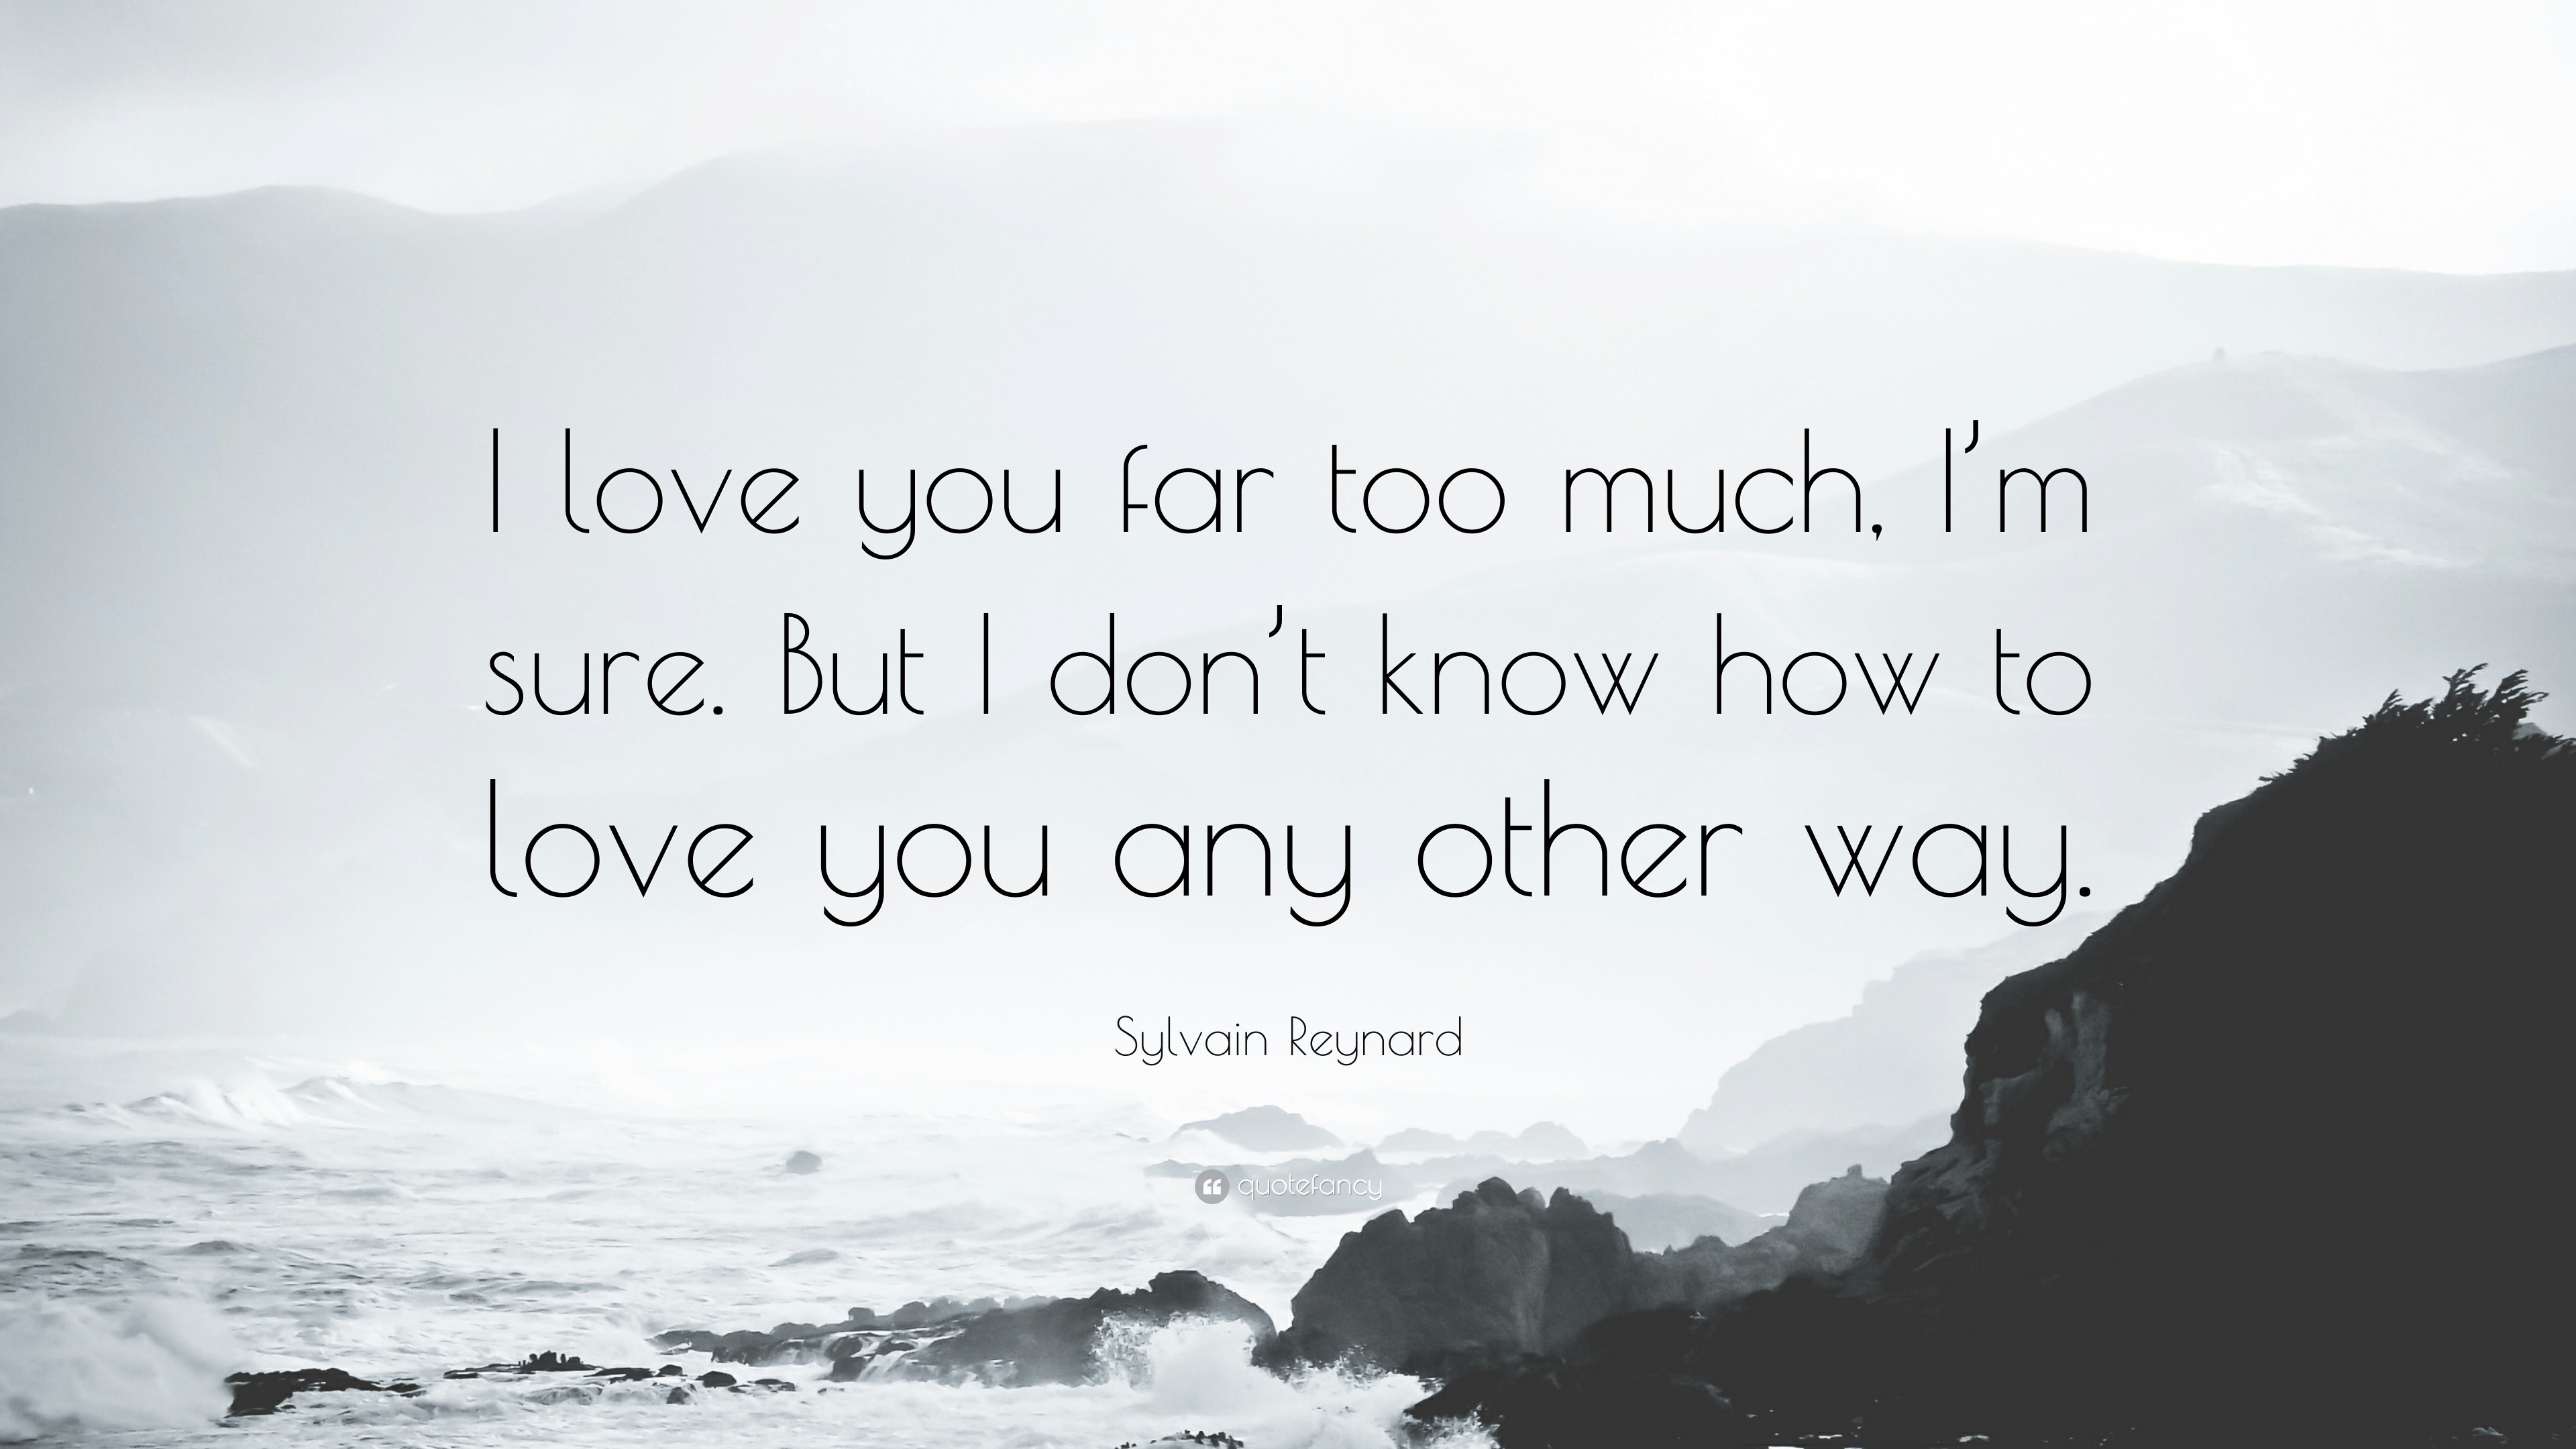 Sylvain Reynard Quote “I love you far too much I m sure